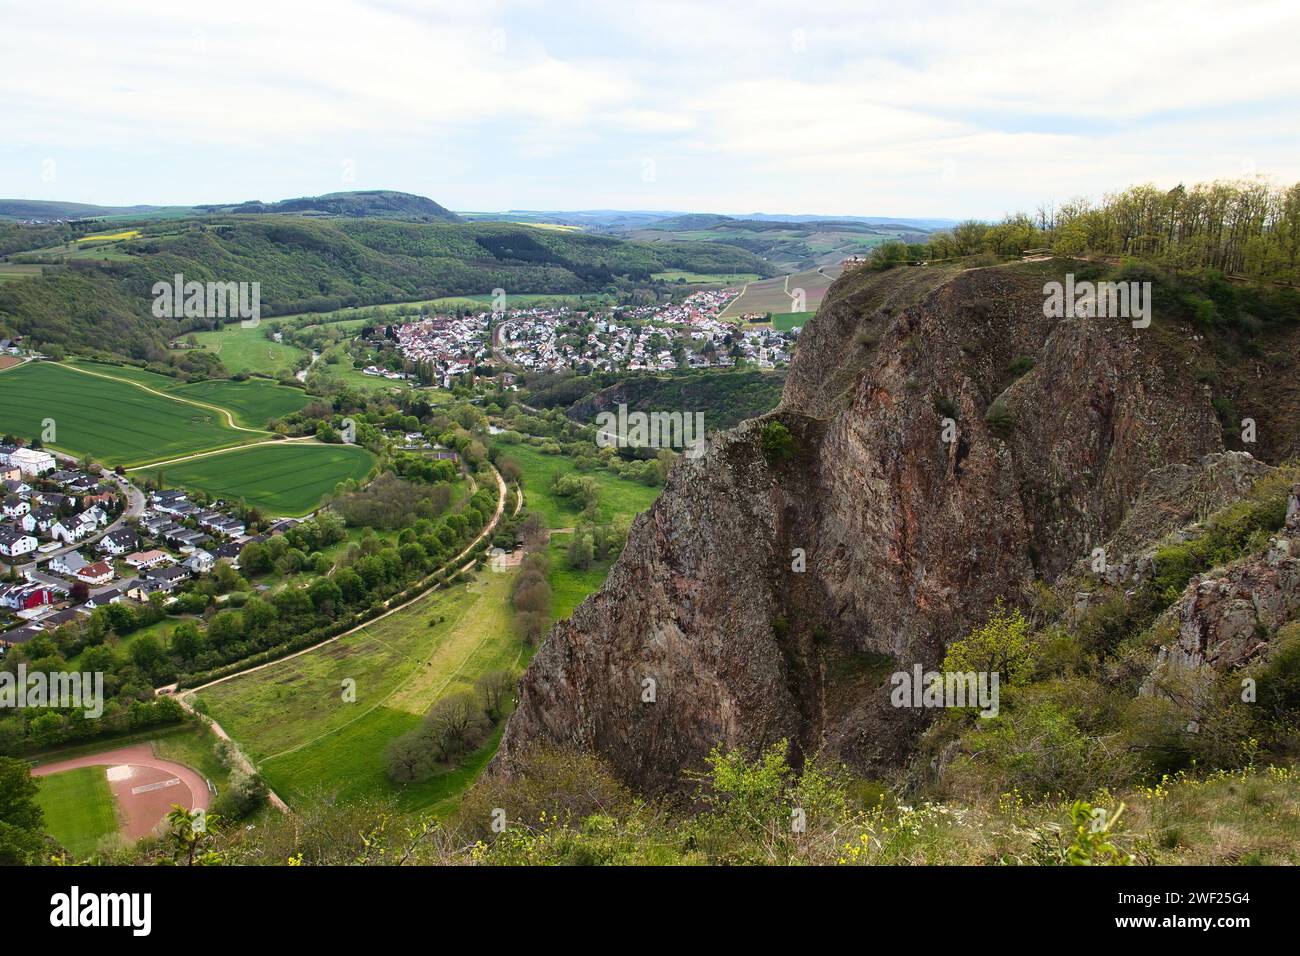 Bad Munster, Germany - May 9, 2021: Rotenfels cliff overlooking German village, green fields and hills on a spring day. Stock Photo